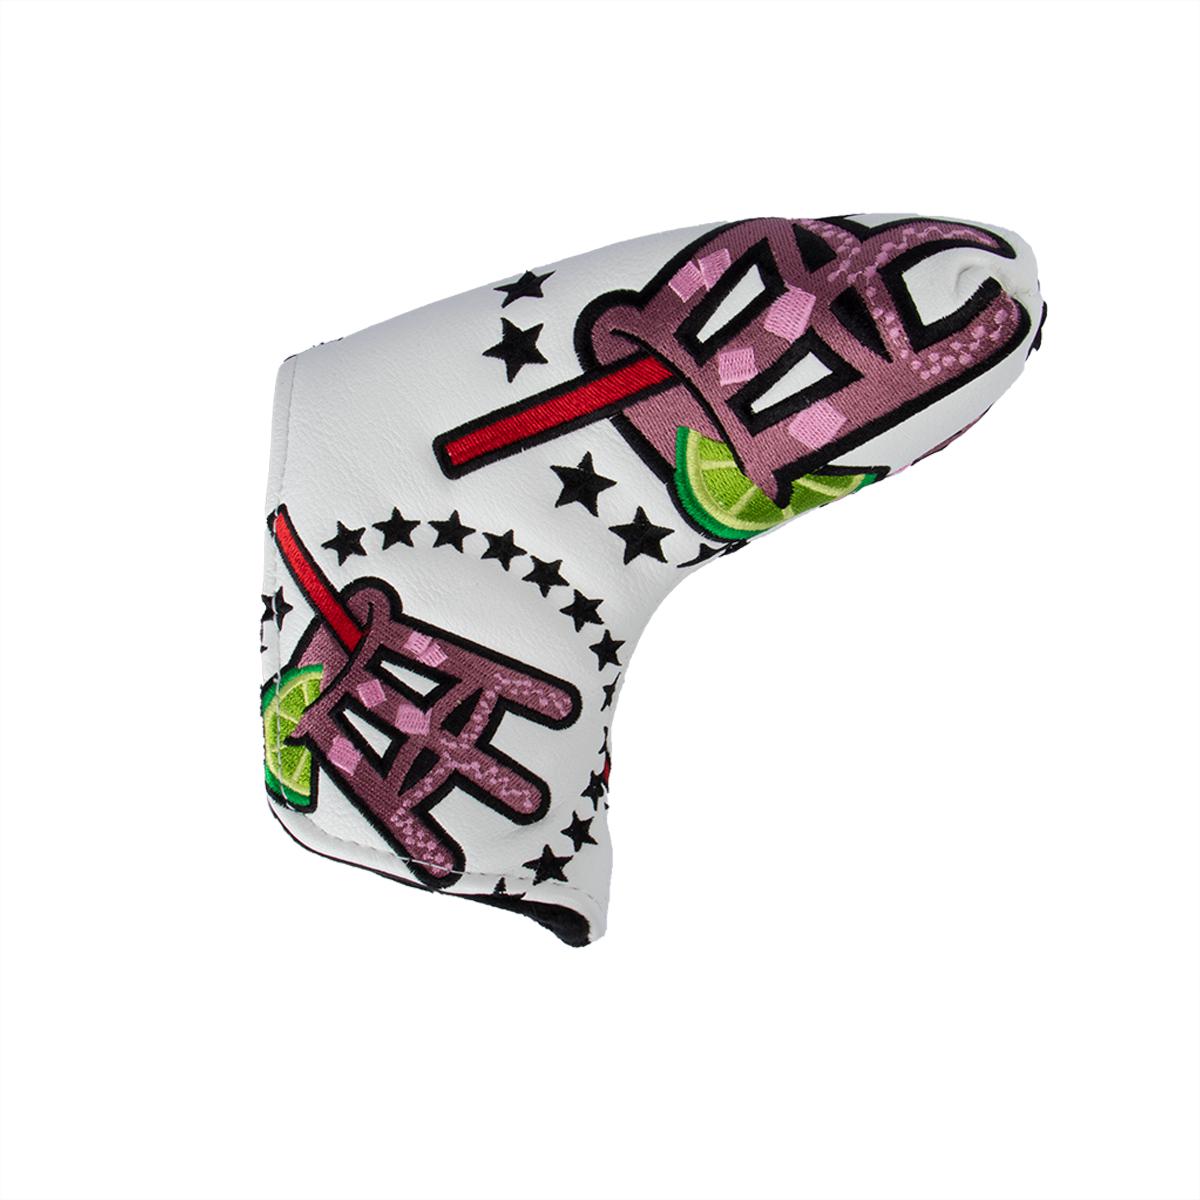 Transfusion Blade Putter Cover-Golf Accessories-Fore Play-White-One Size-Barstool Sports